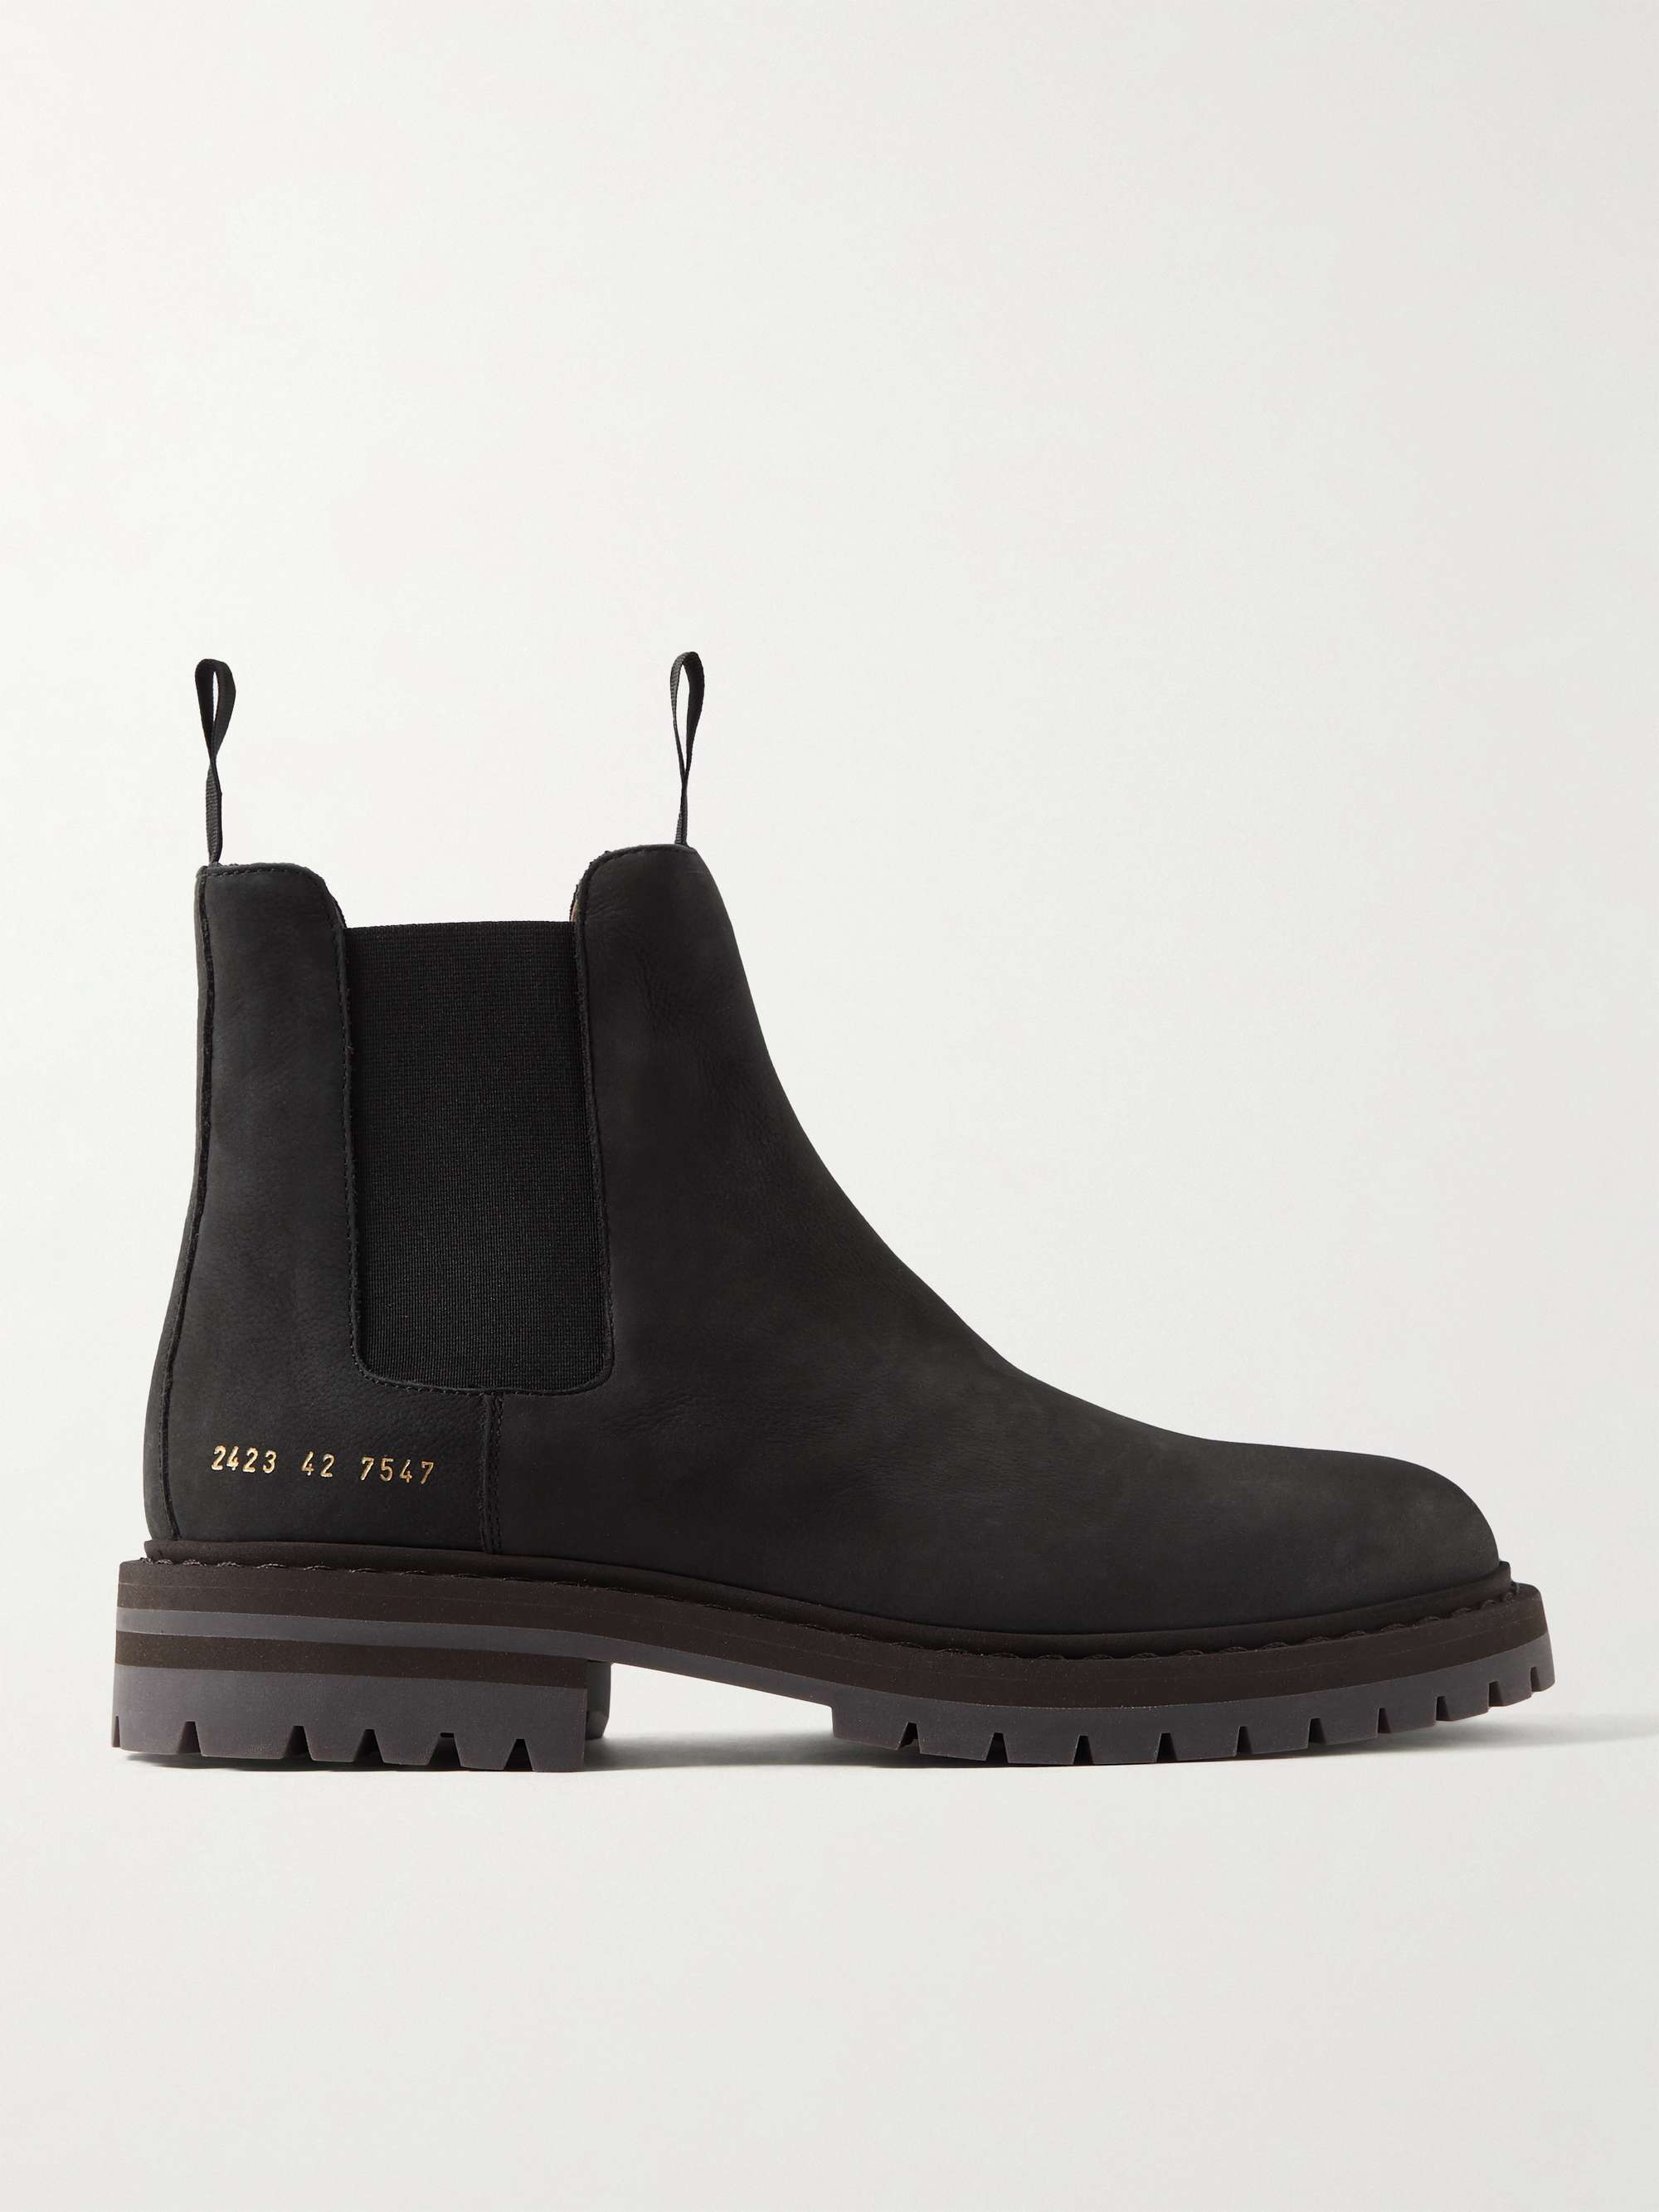 COMMON PROJECTS Nubuck Chelsea Boots for Men | MR PORTER